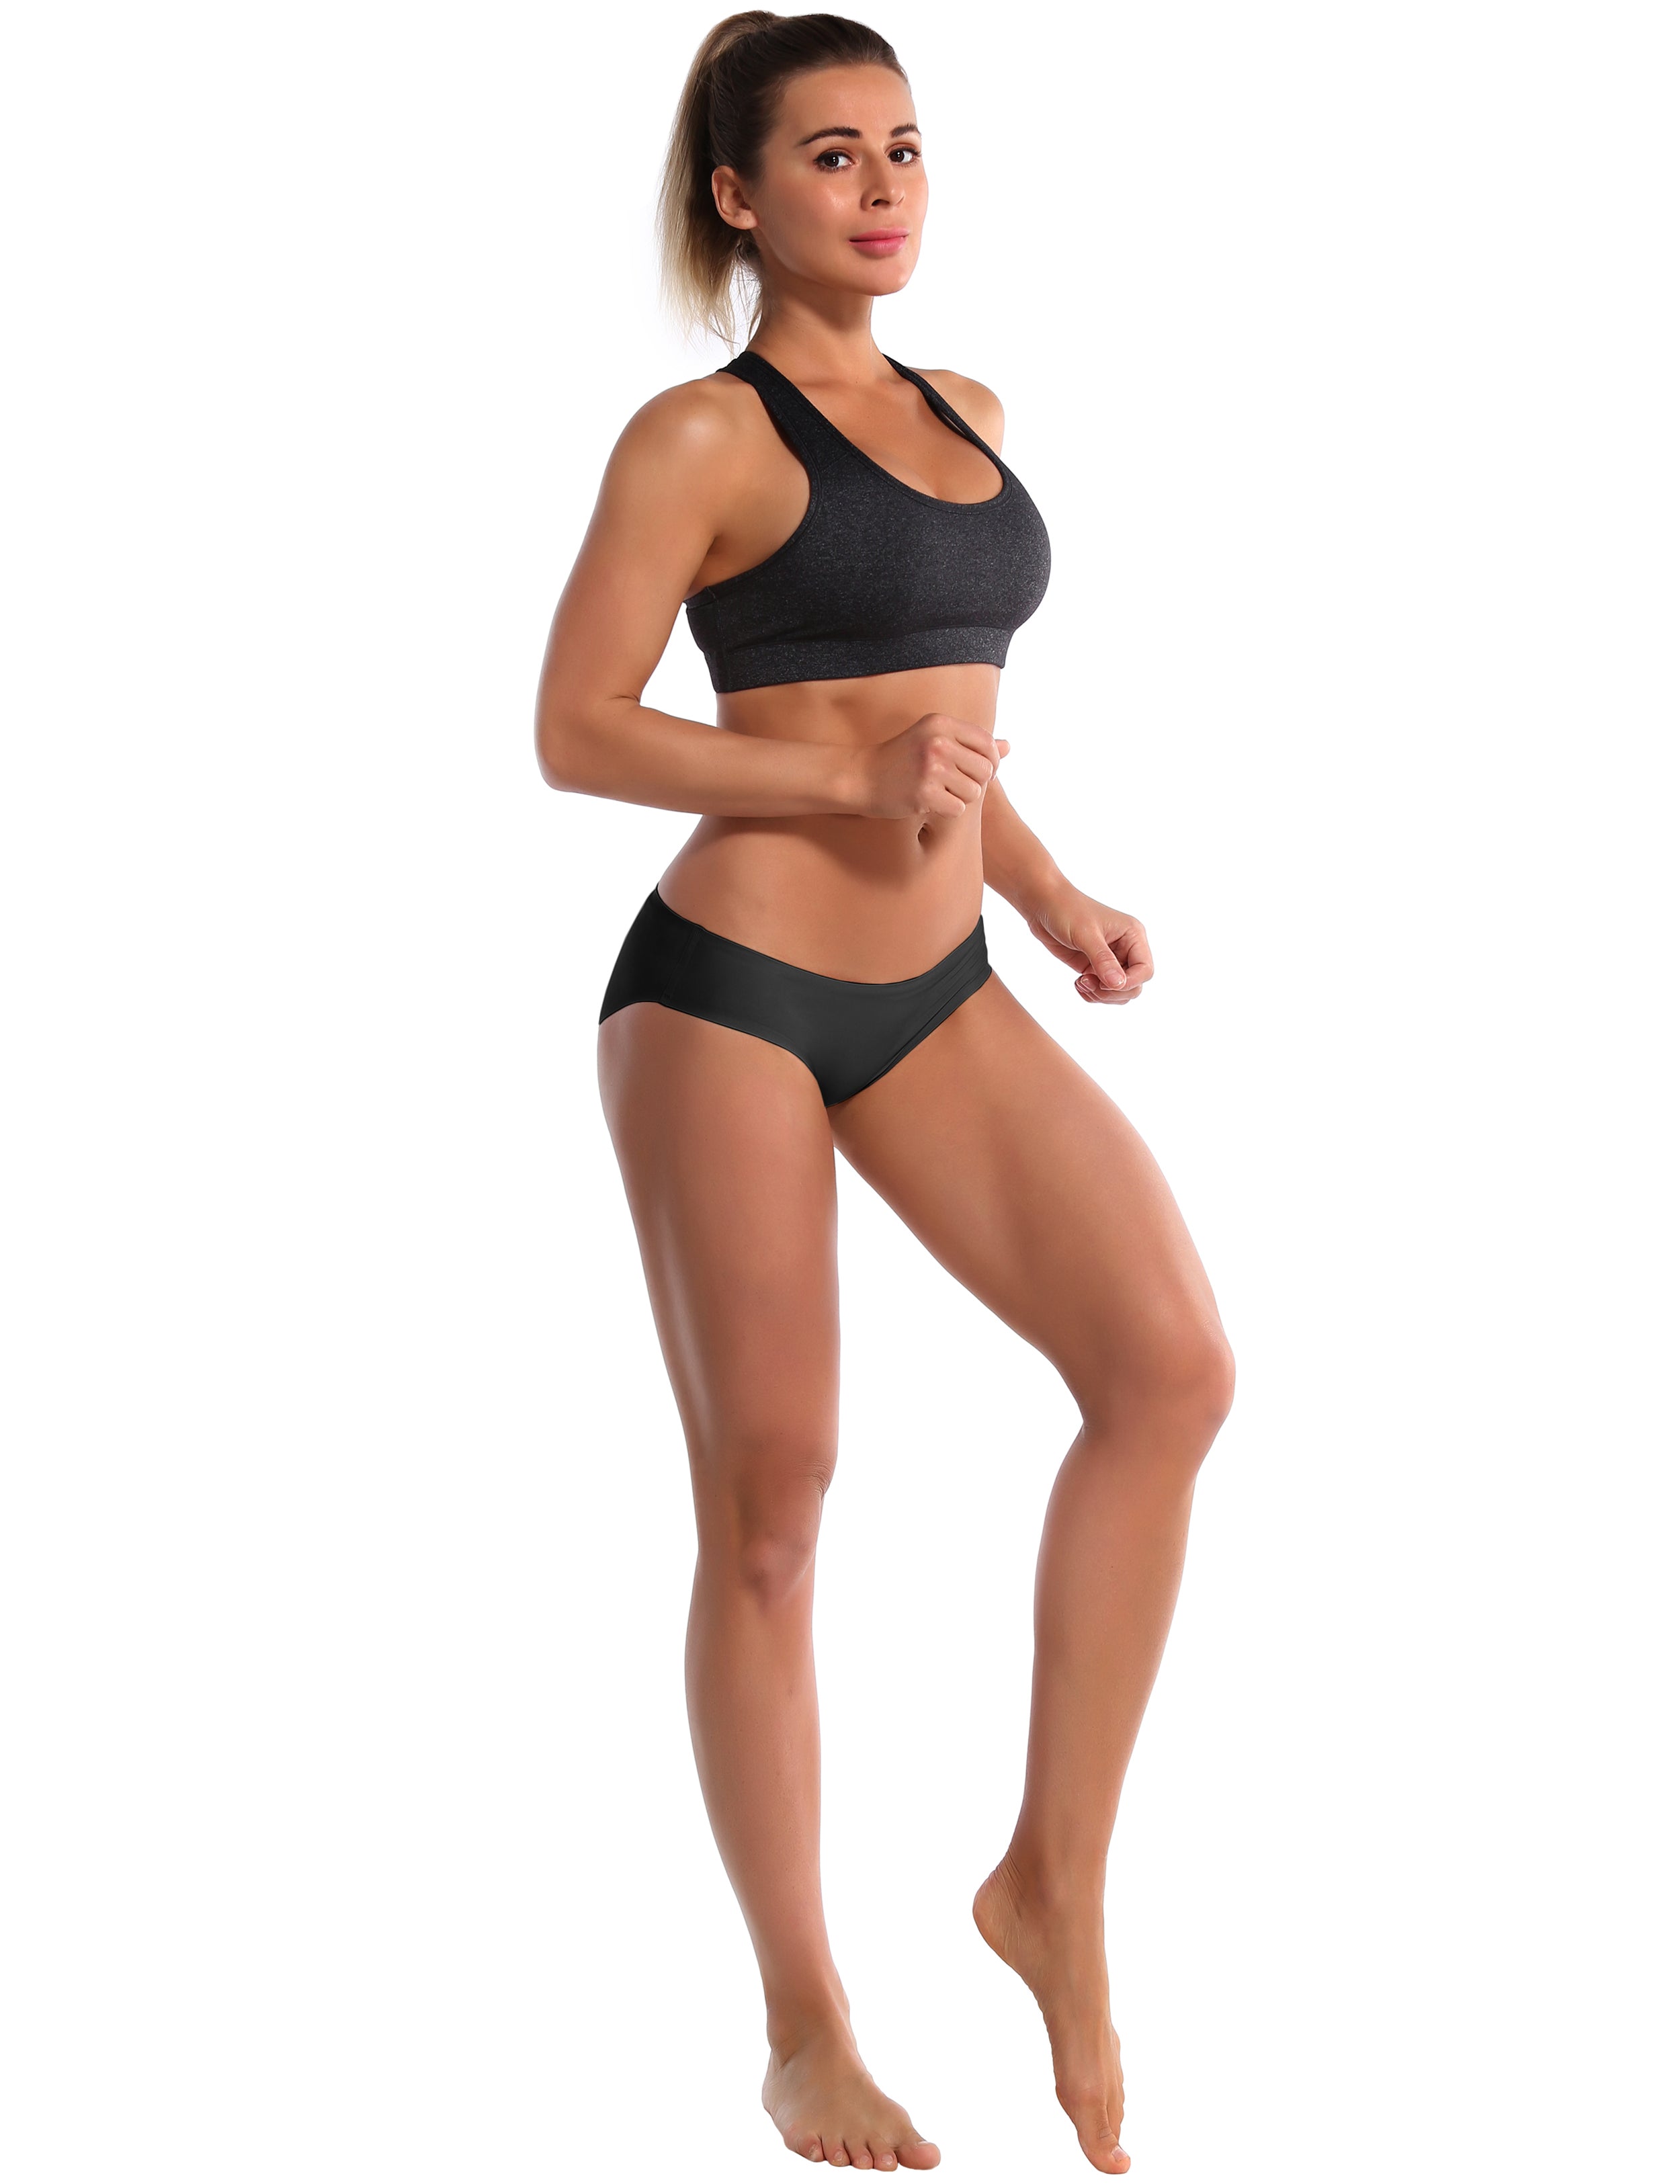 Invisibles Sport Bikini Panties black Sleek, soft, smooth and totally comfortable: our newest bikini style is here. High elasticity High density Softest-ever fabric Laser cutting Unsealed Comfortable No panty lines Machine wash 95% Nylon, 5% Spandex